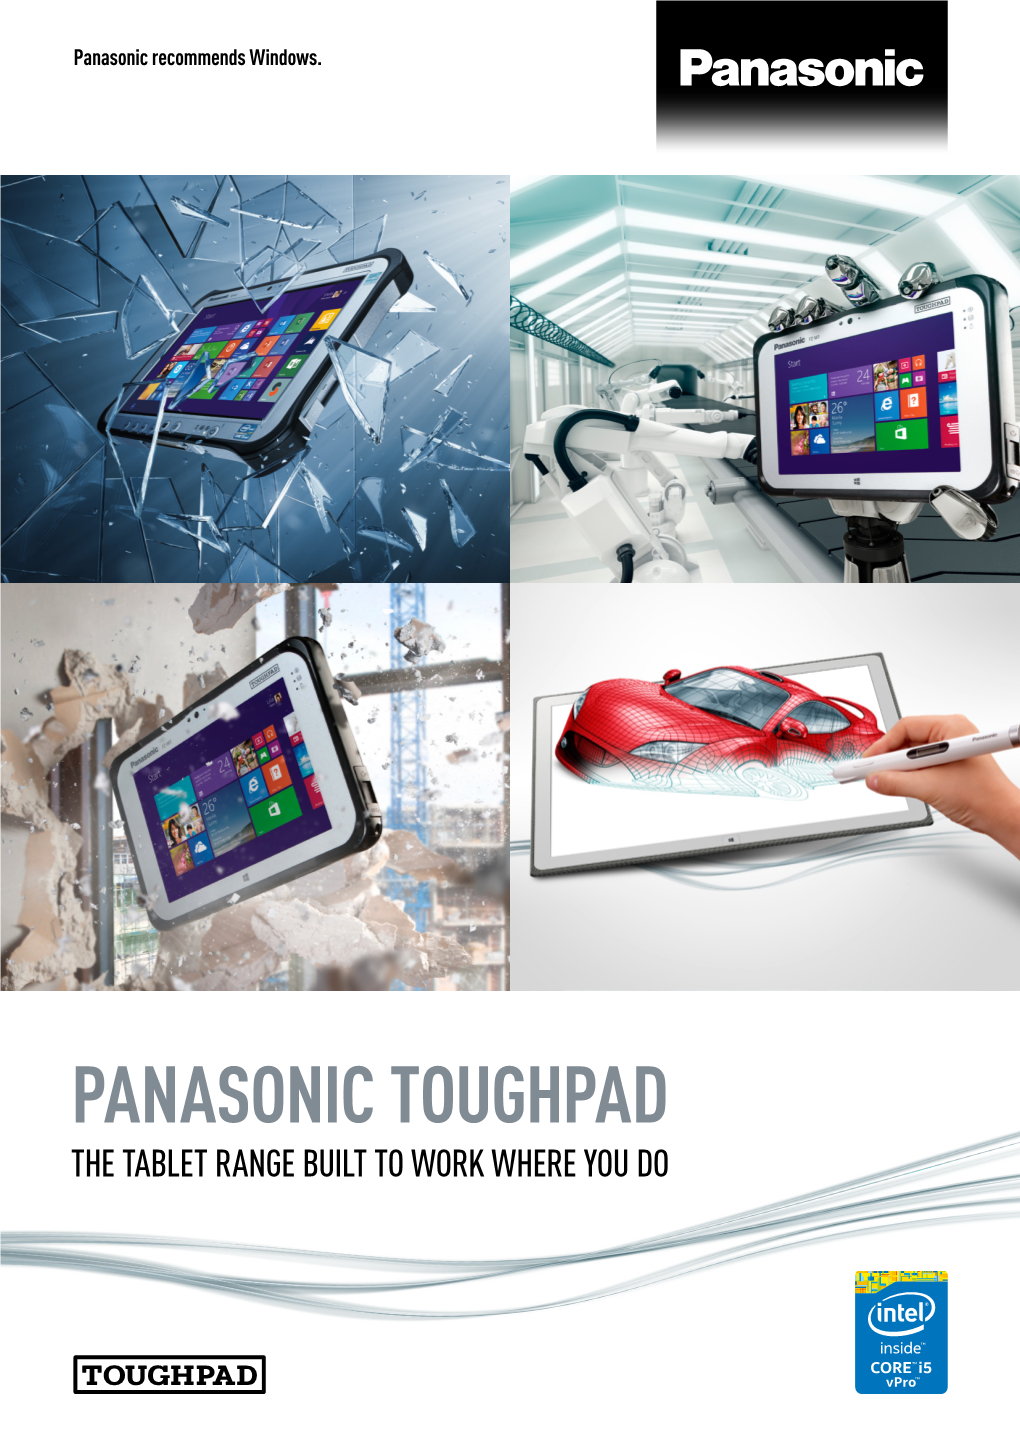 PANASONIC TOUGHPAD the TABLET RANGE BUILT to WORK WHERE YOU DO Panasonic Recommends Windows